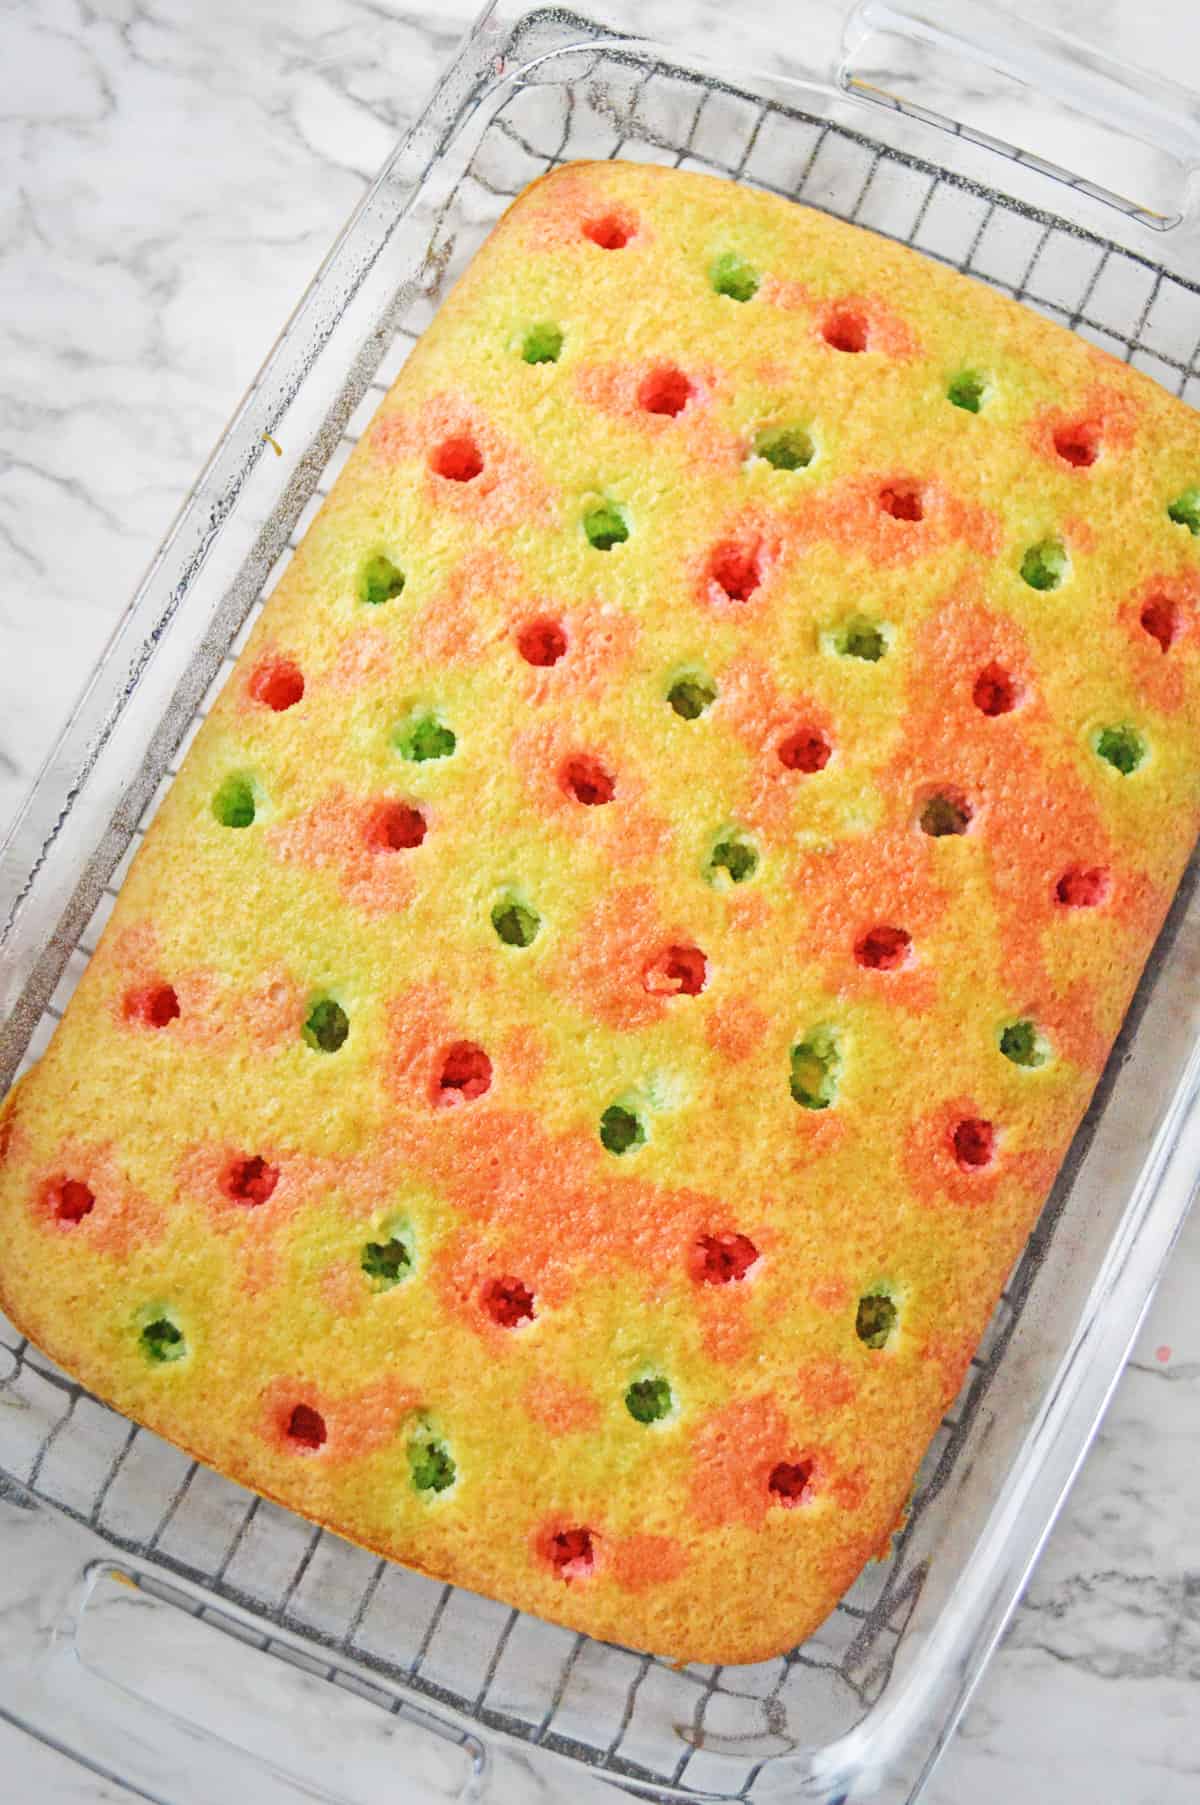 Rectangular vanilla cake poked with holes over the entire cake, each about 1 inch apart. Red and green jello has been poured into holes in an alternating pattern.